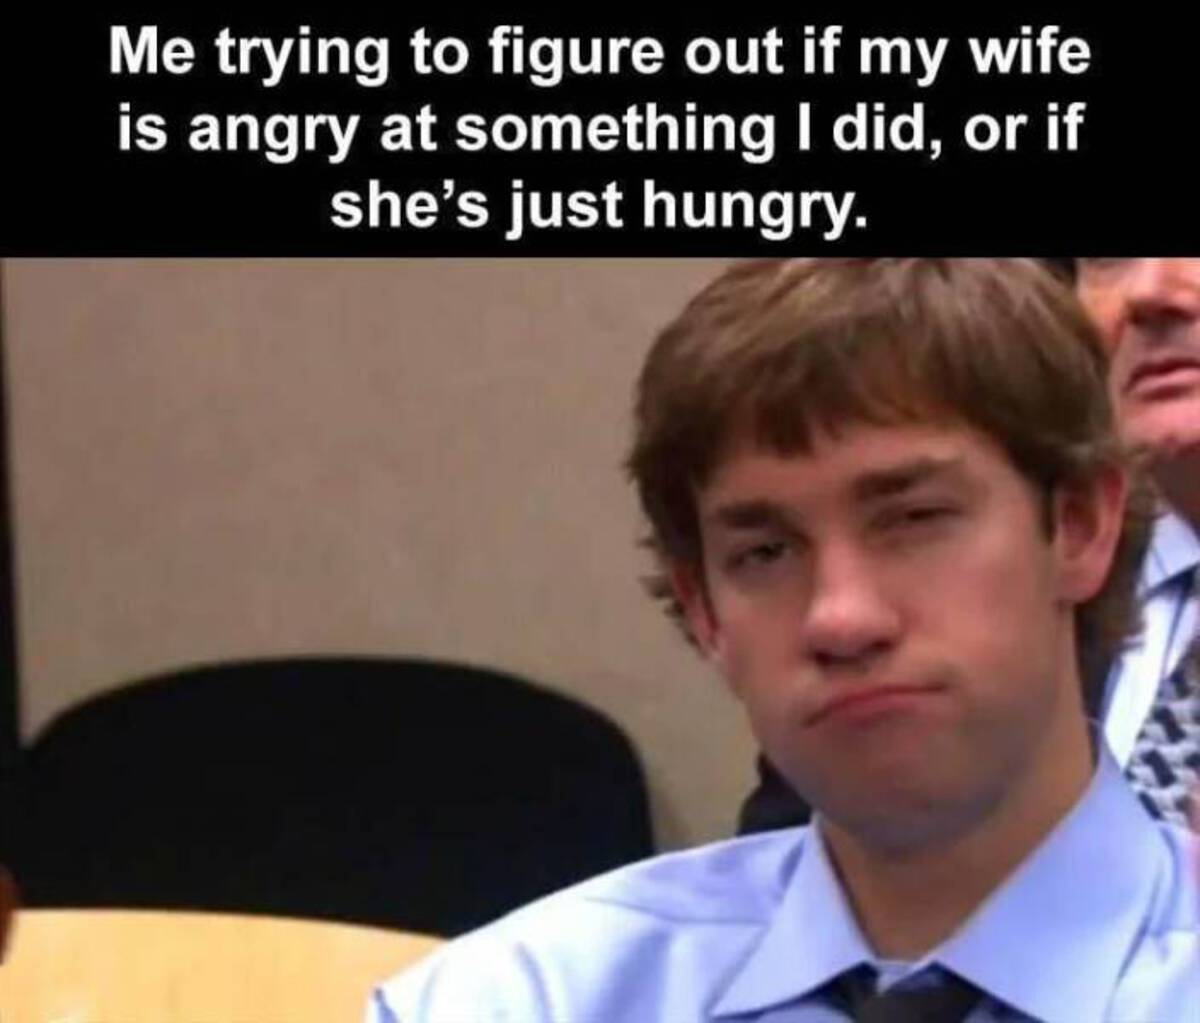 Funny meme - Me trying to figure out if my wife is angry at something I did, or if she's just hungry.